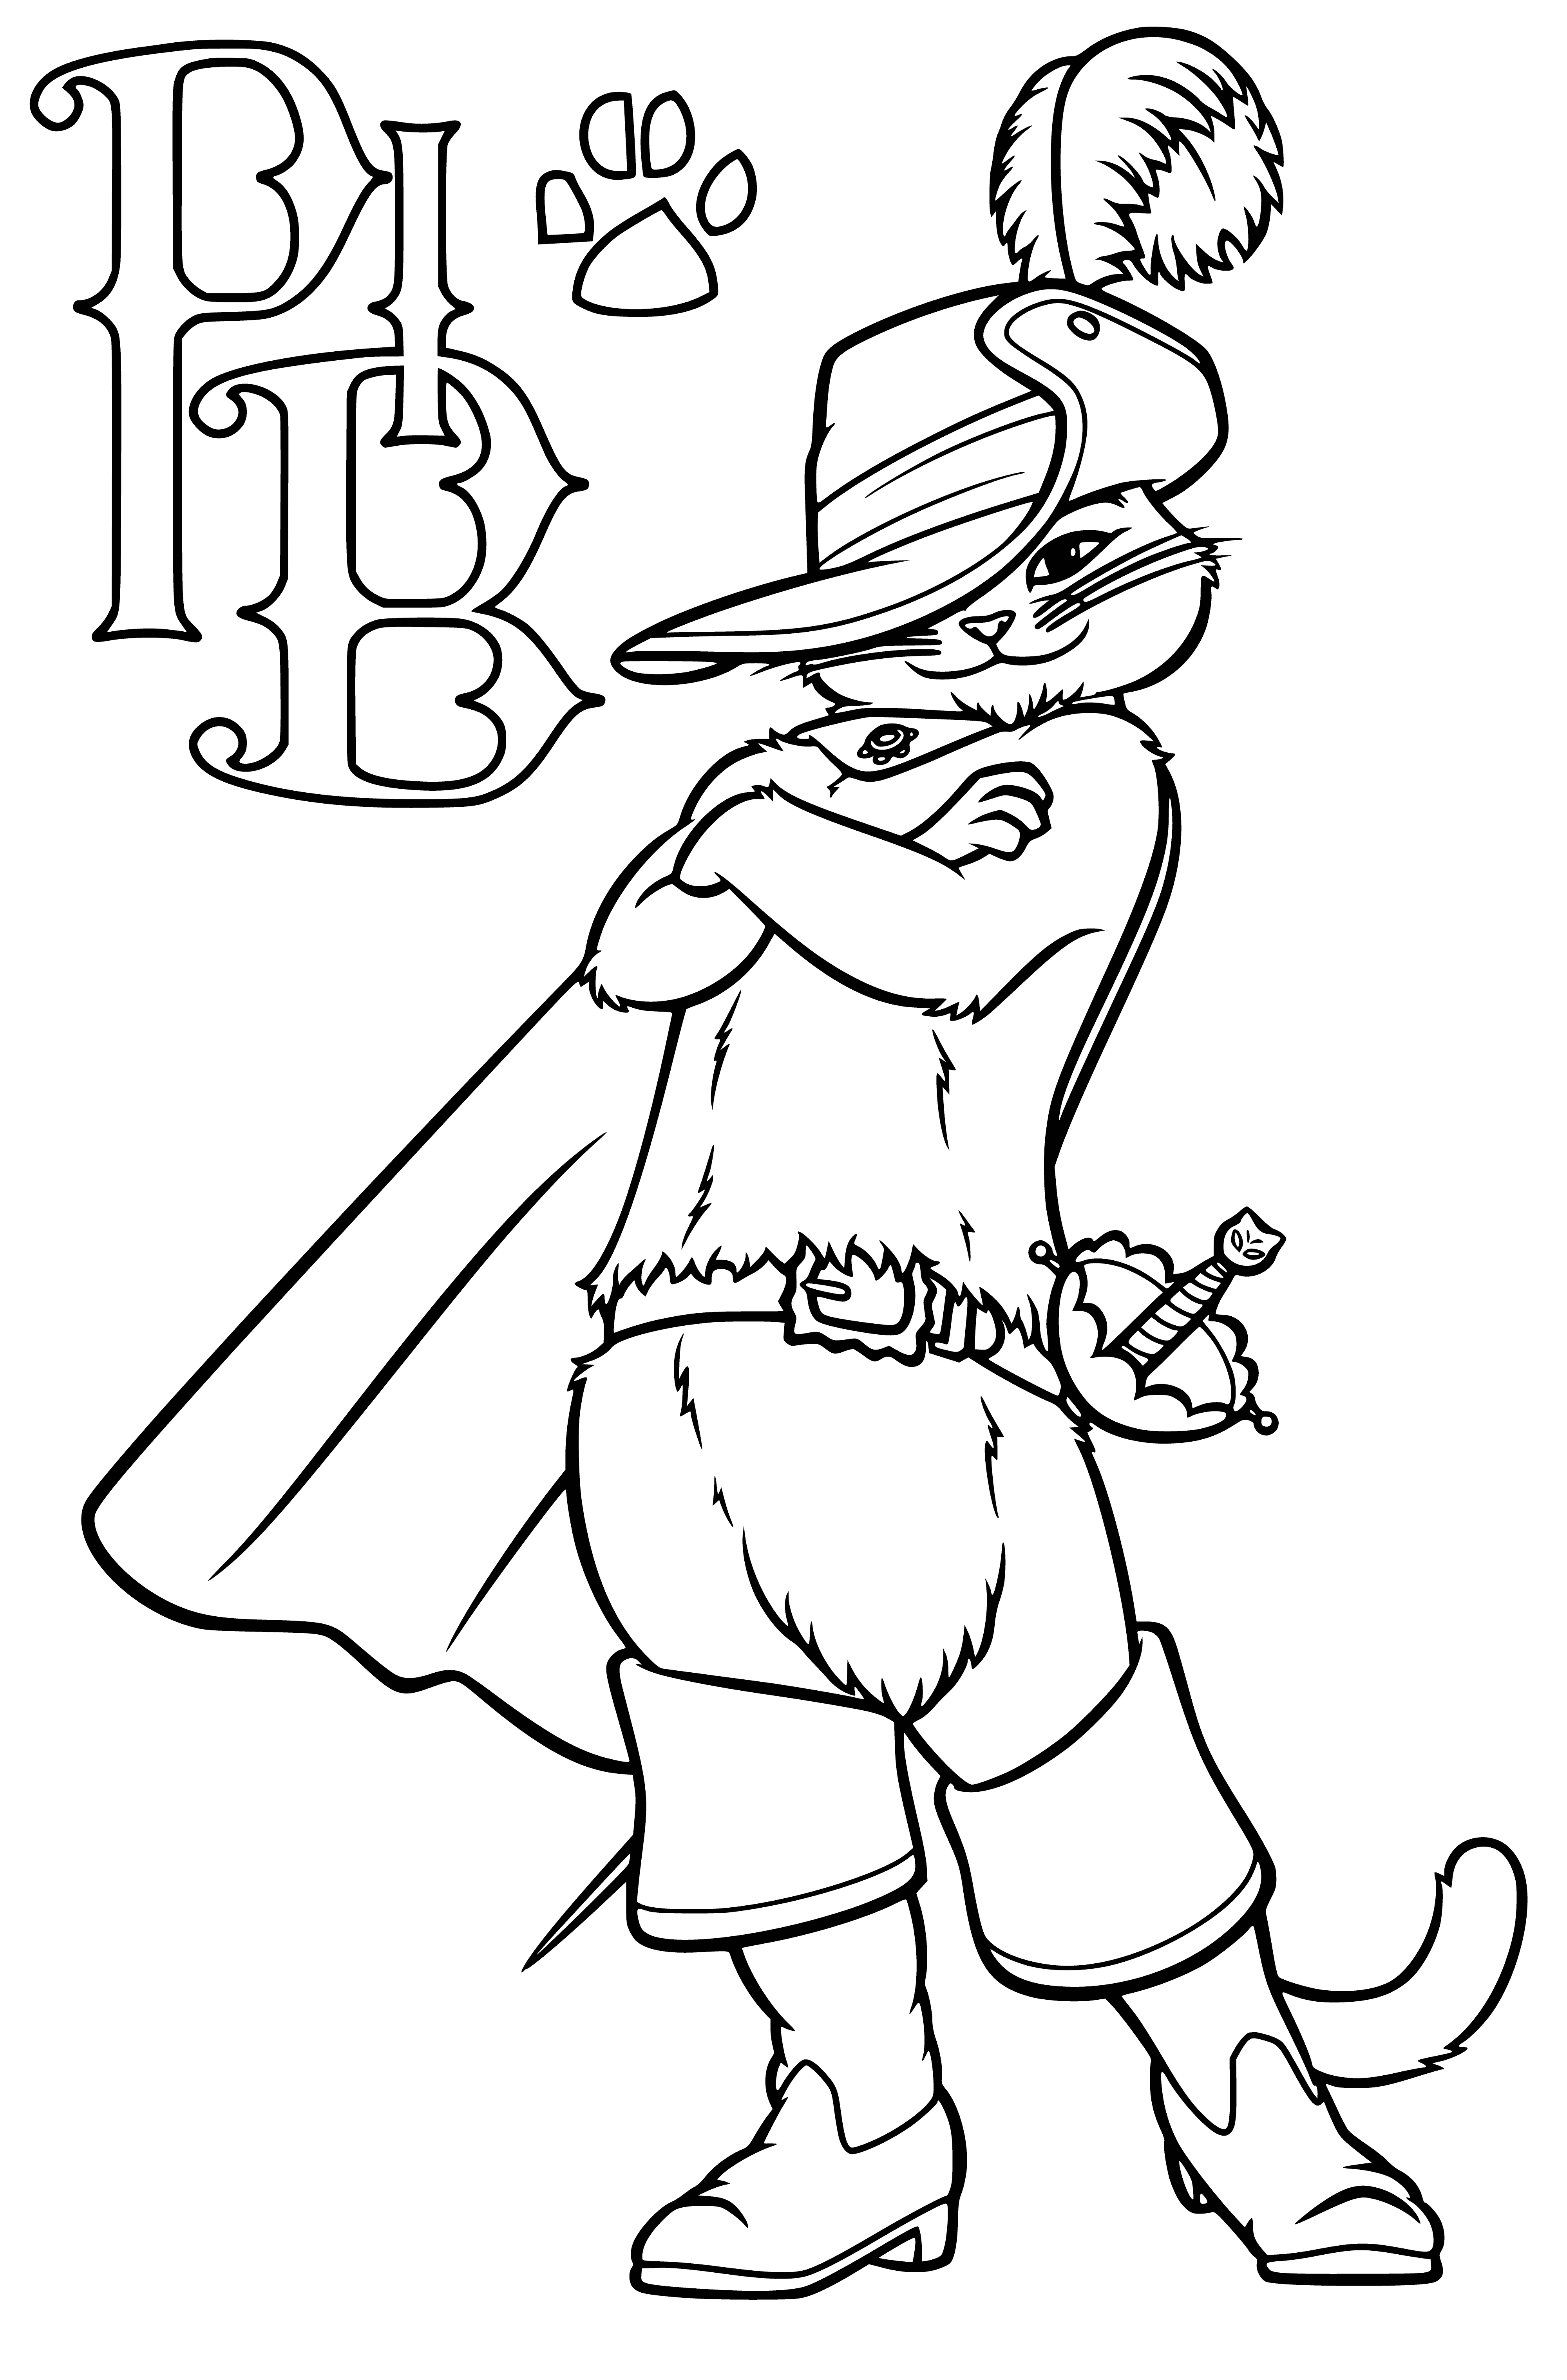 coloring page: A ginger cat wearing a pointy blue hat and tall brown boots perches atop a log, smug. A white rabbit and brown squirrel look on nearby.